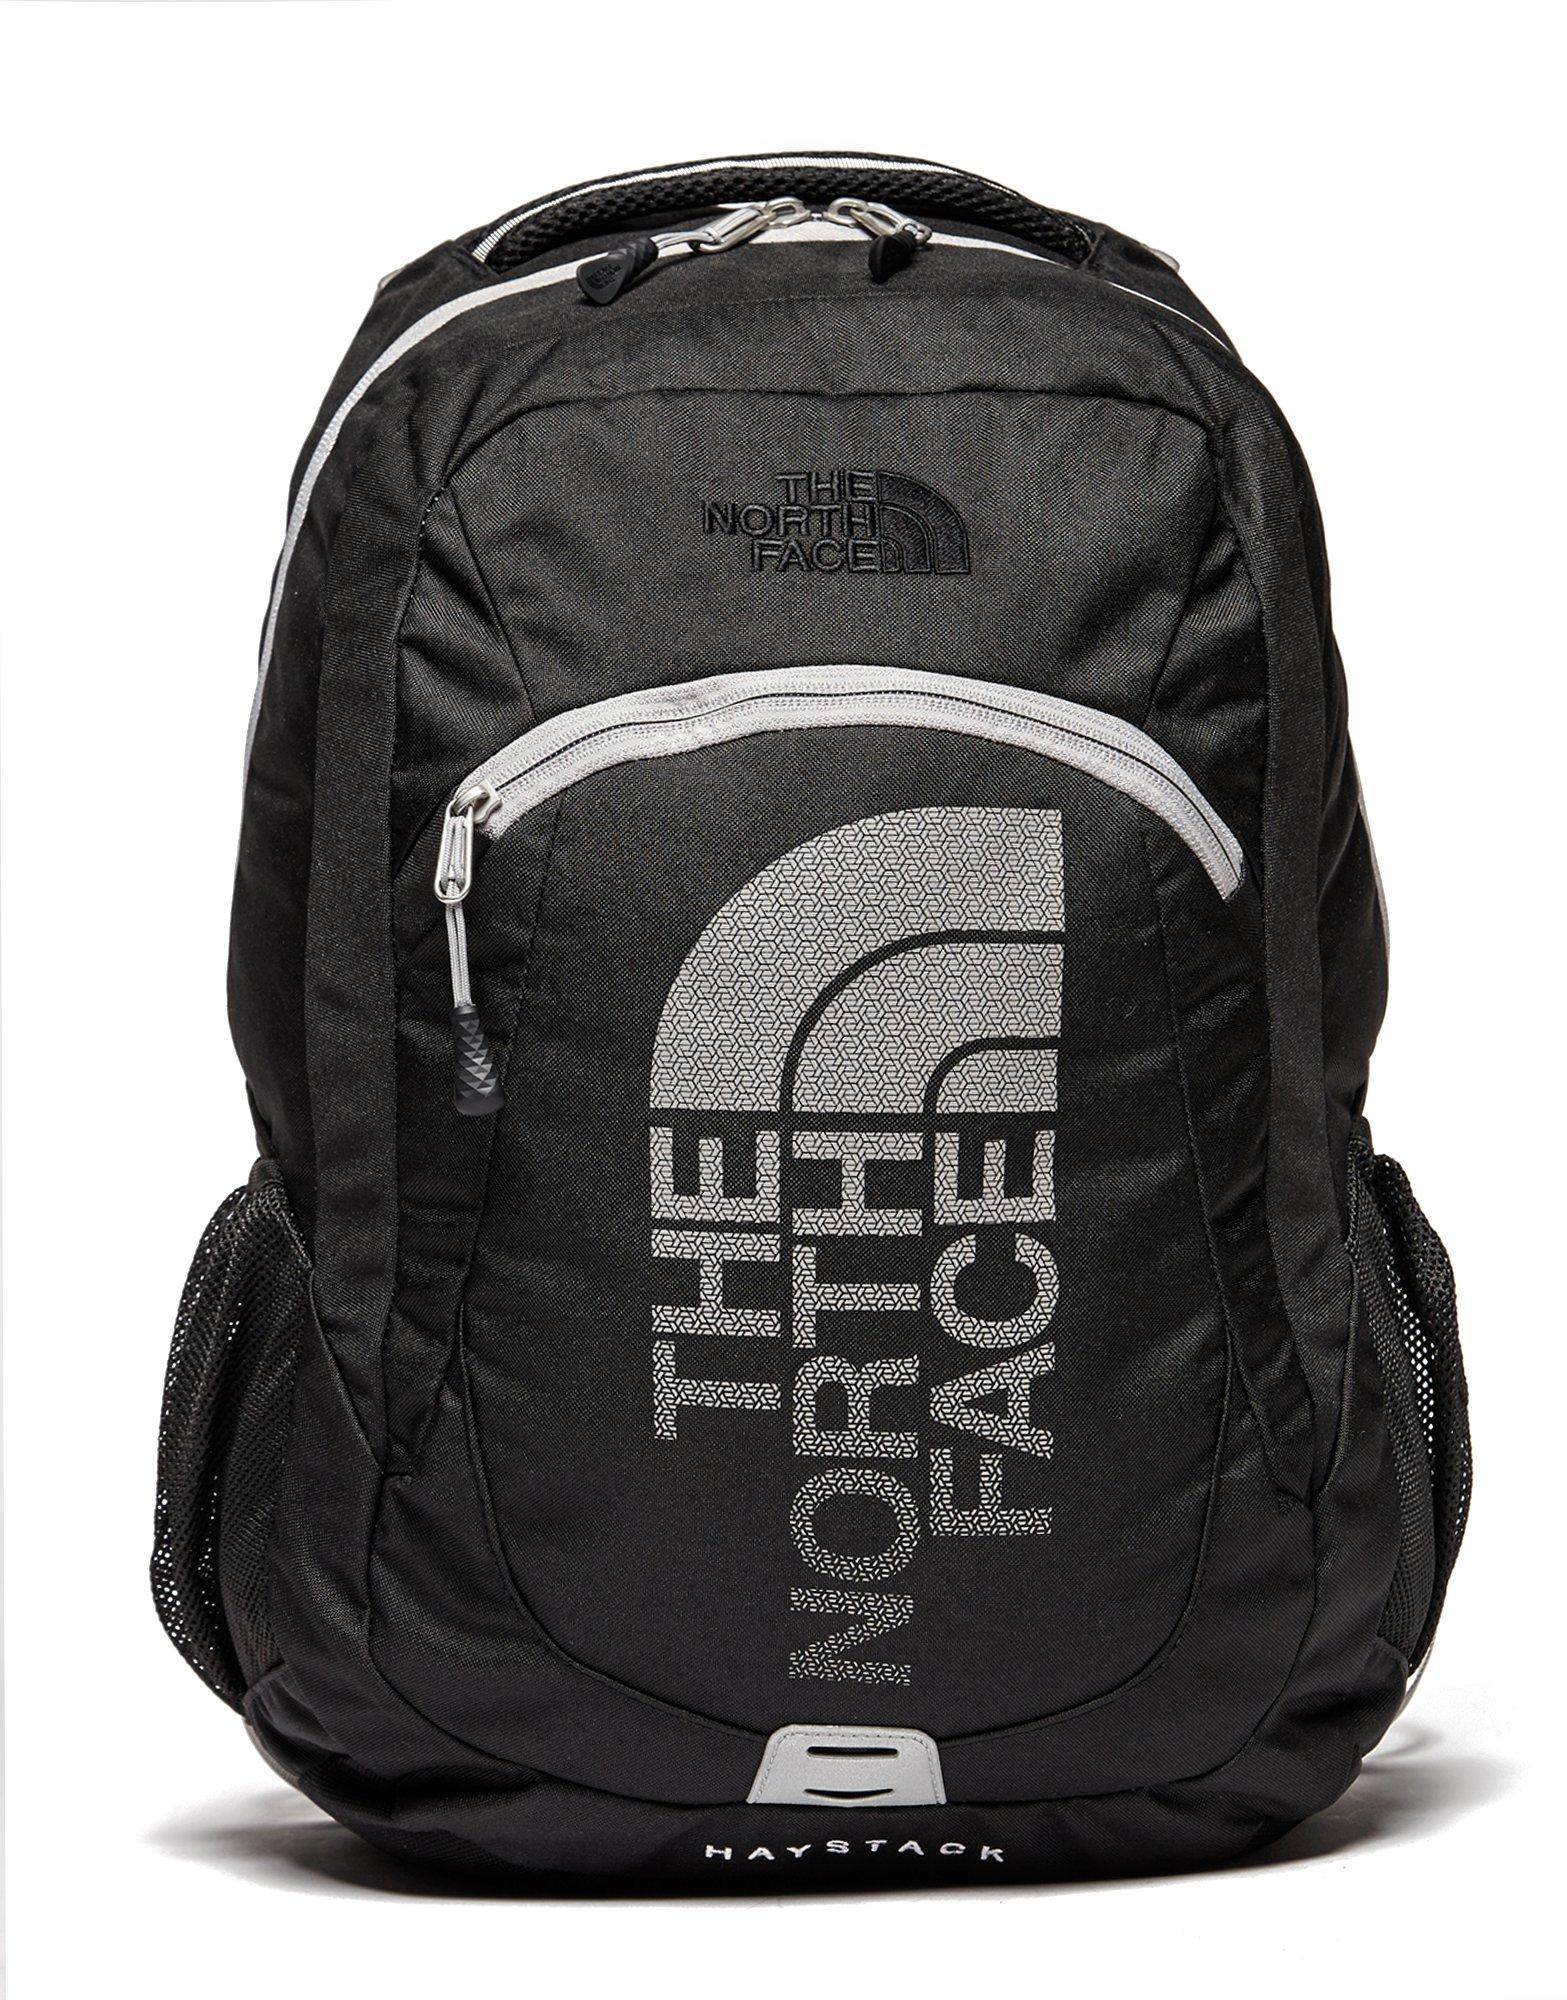 The North Face Unisex Haystack College Backpack Sales Cheapest, 64% OFF |  planprosessen.wp.nettmaker.no